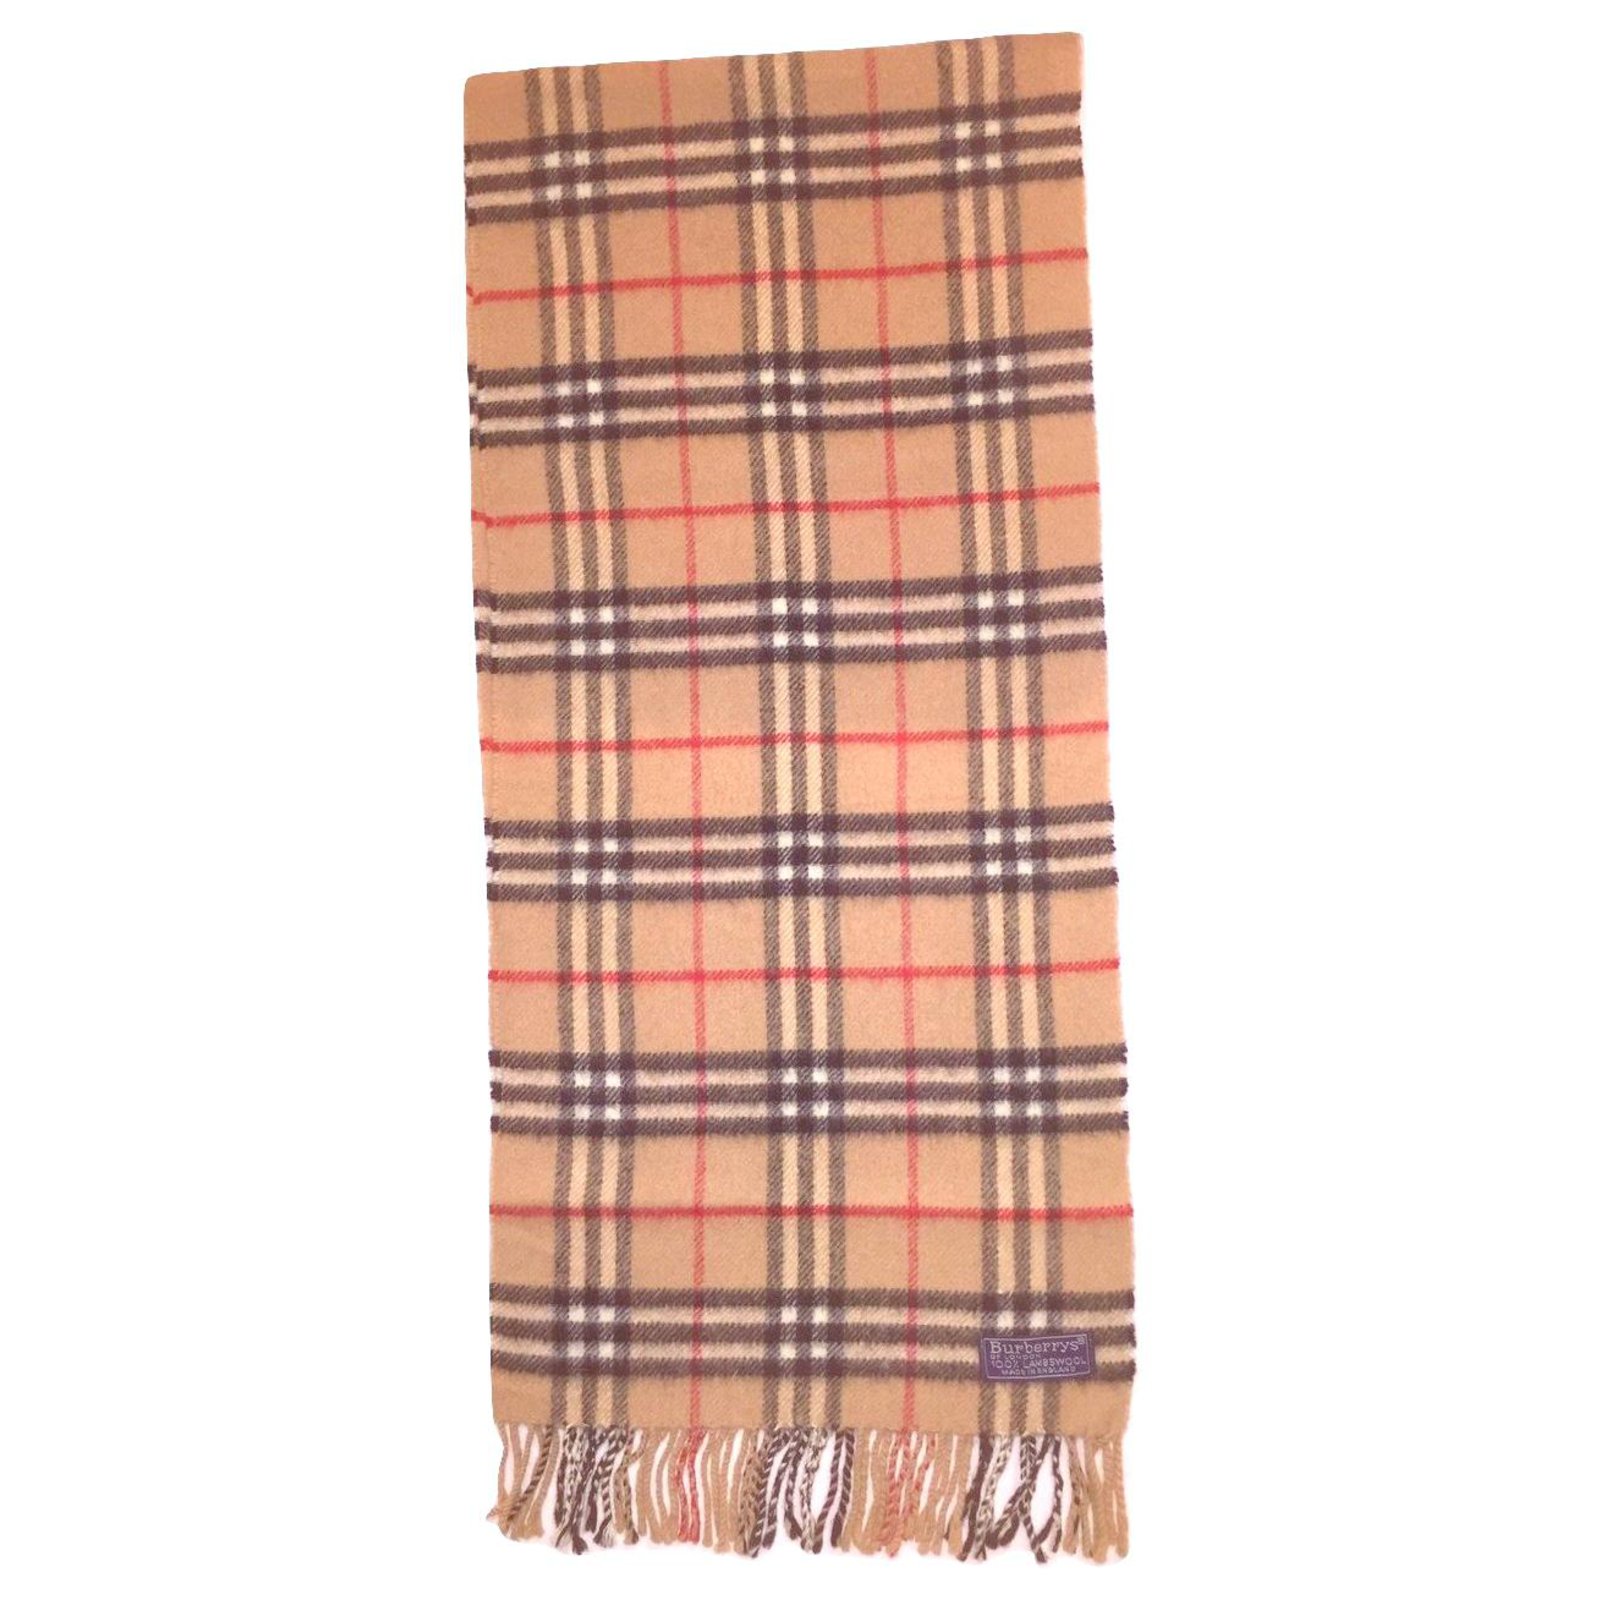 burberry lambswool scarf